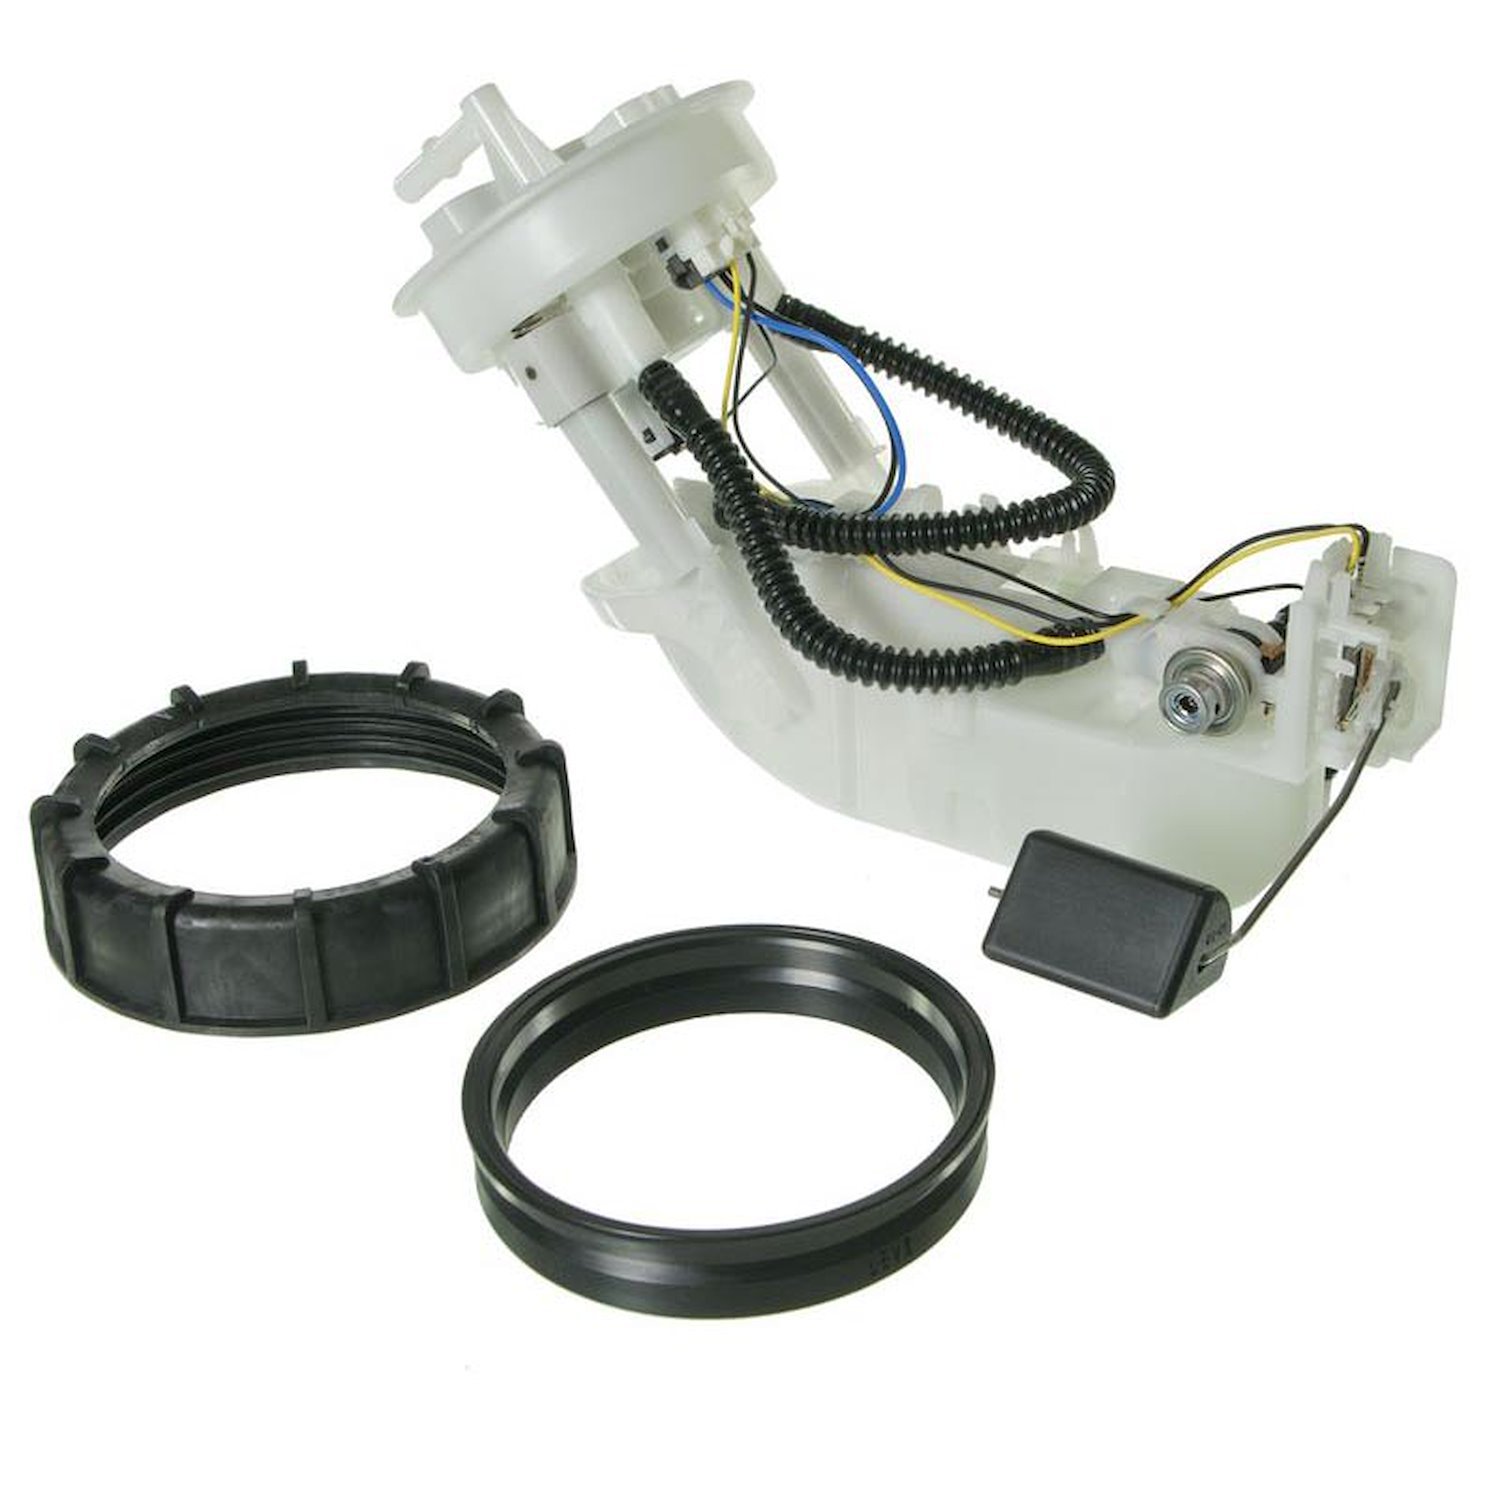 OE Replacement Fuel Pump Module Assembly for 2005-2006